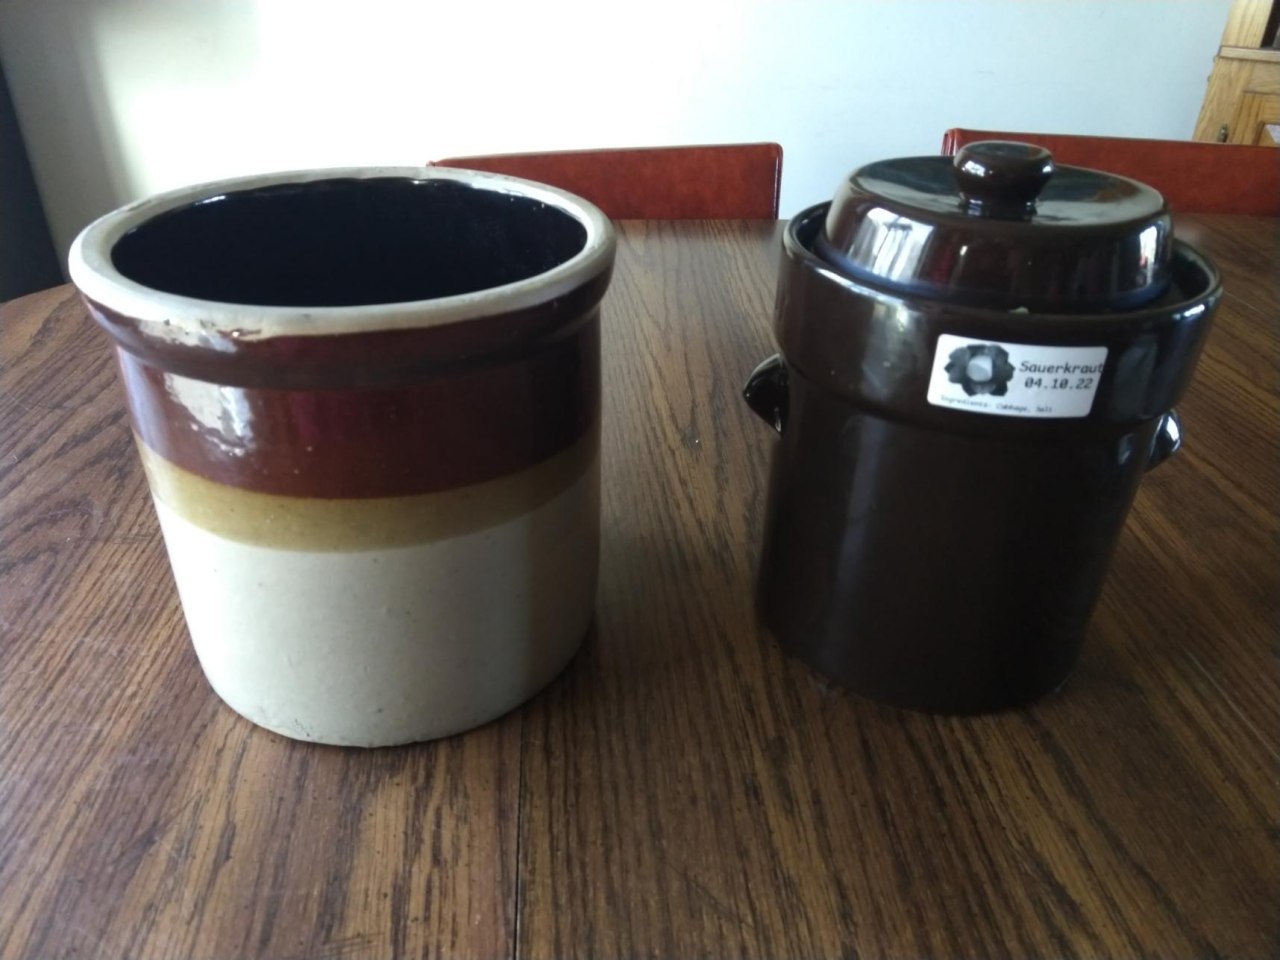 Two fermentation crocks. I got the one on the right at a thrift store. The one on the left is from my grandma, who got it from her grandma.